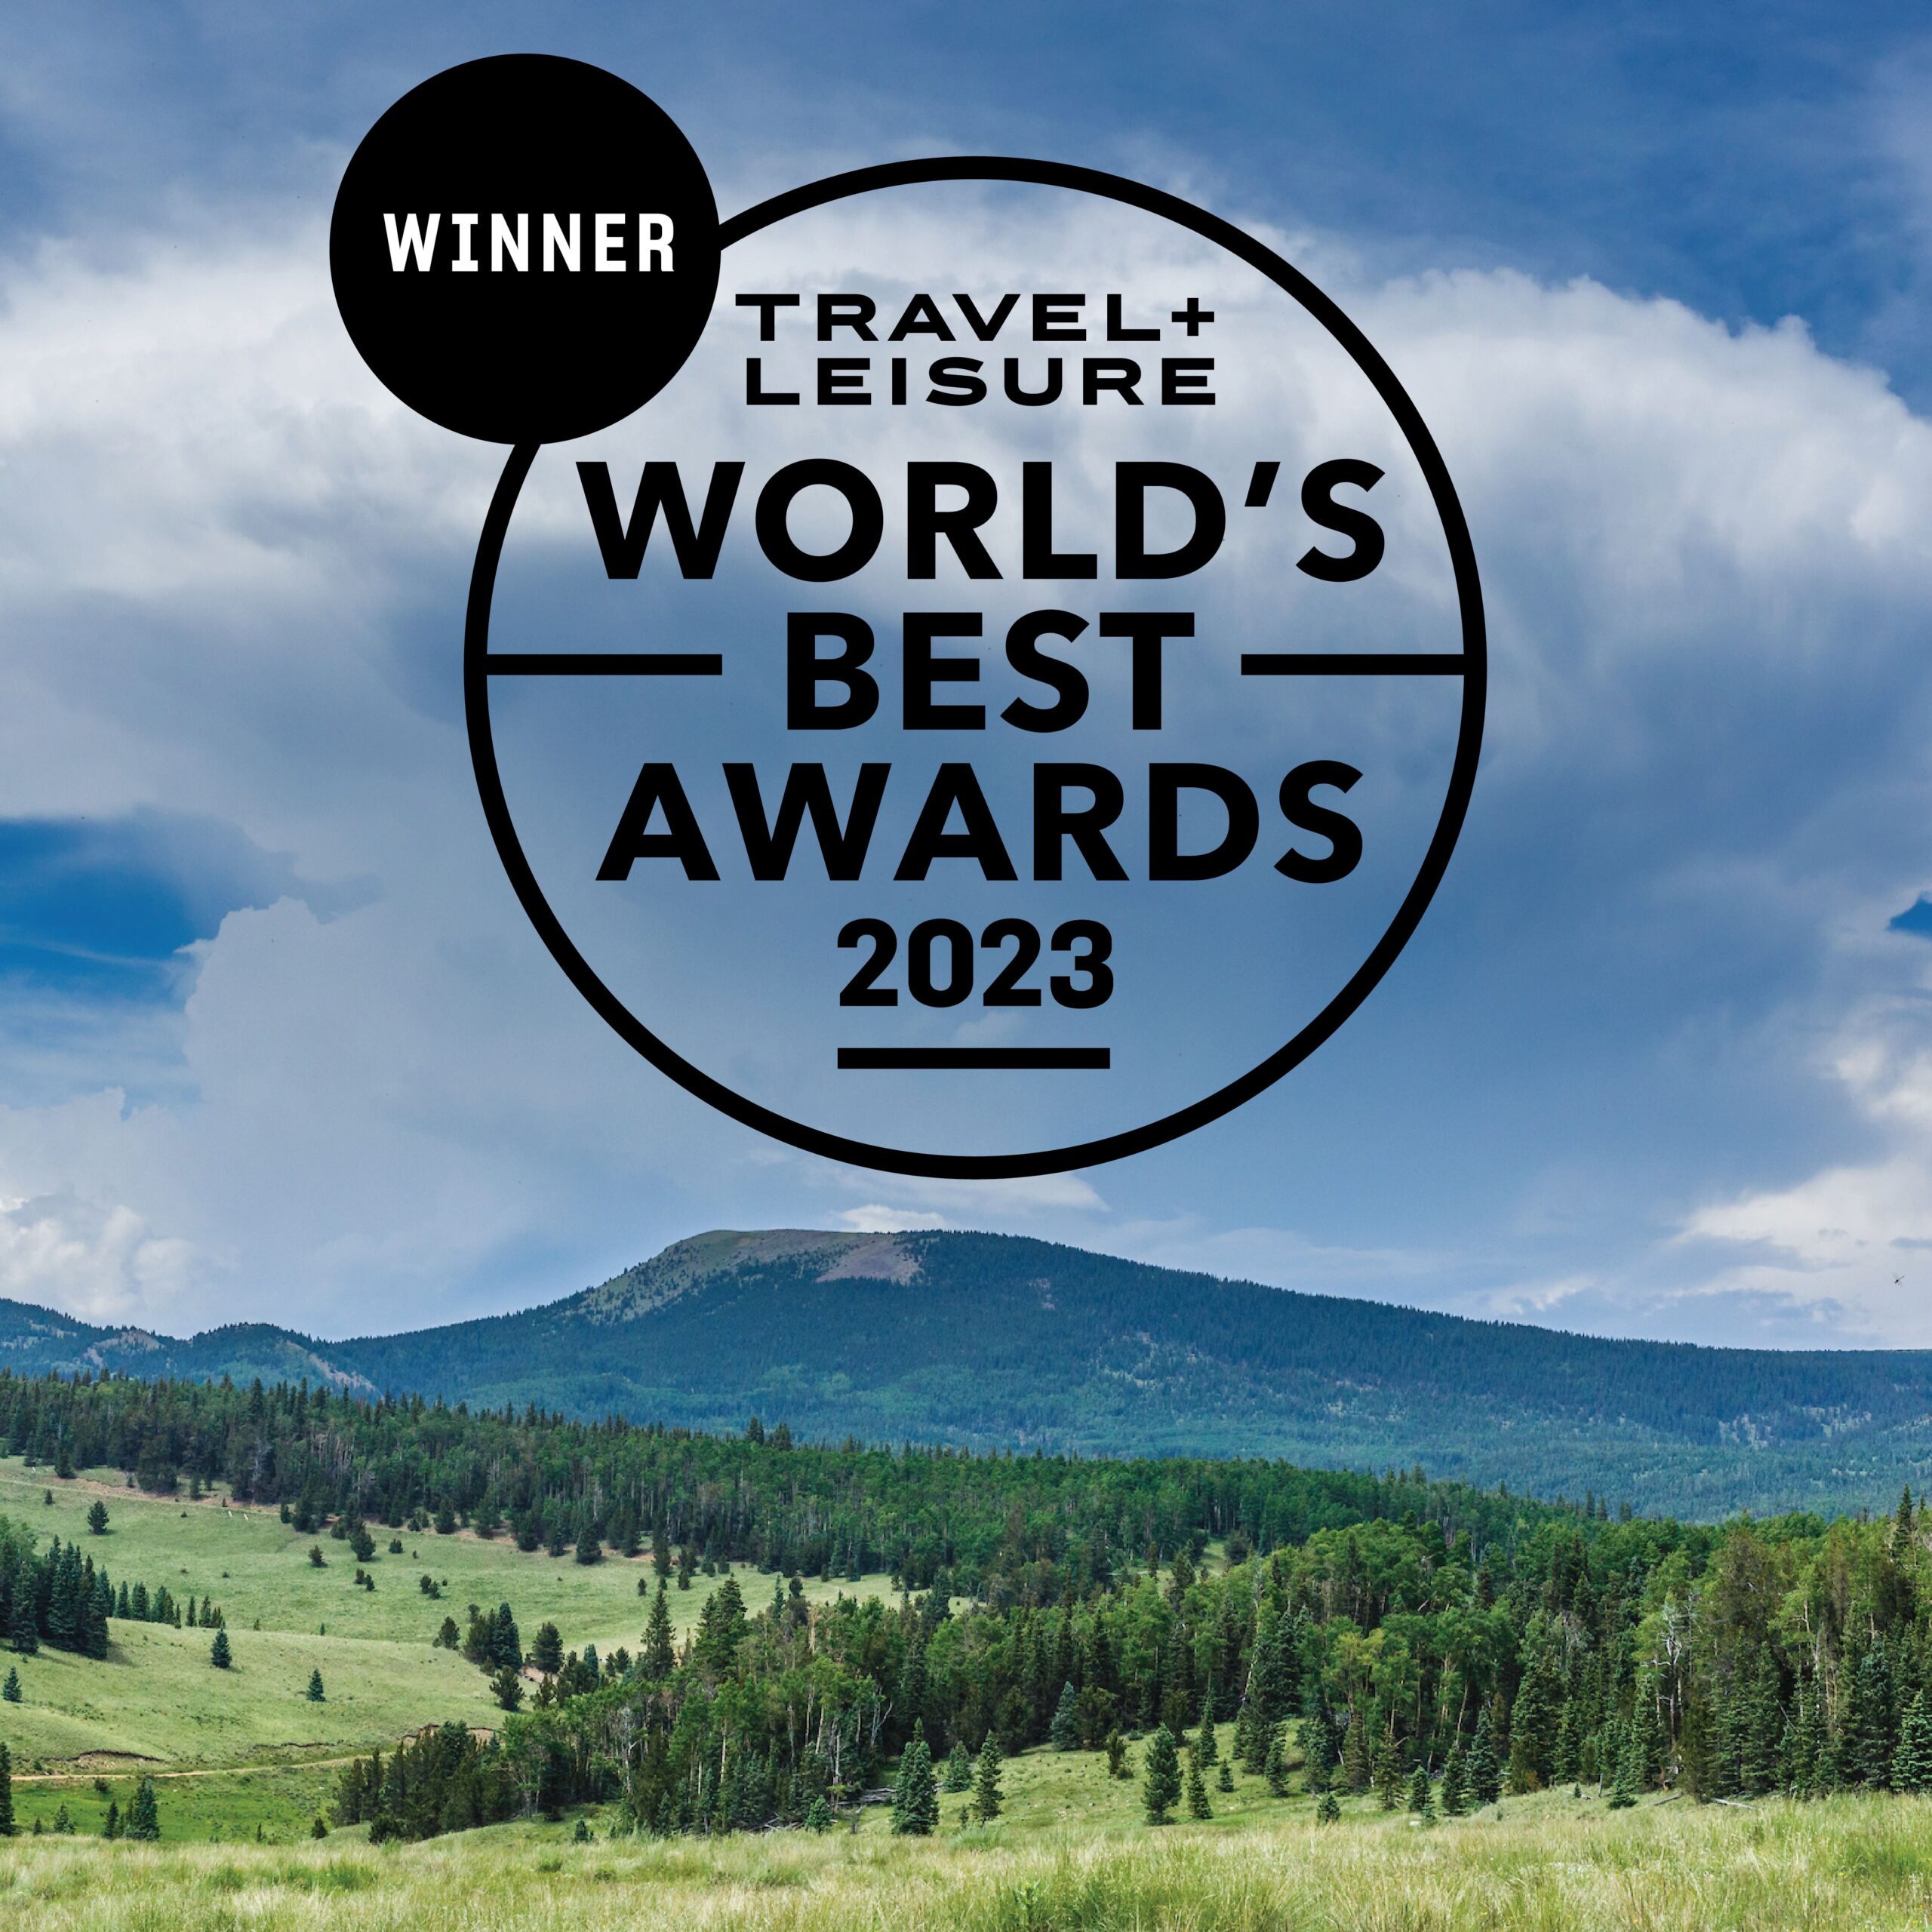 Vermejo recognized as Best Resort Hotel in the West by Travel+Leisure